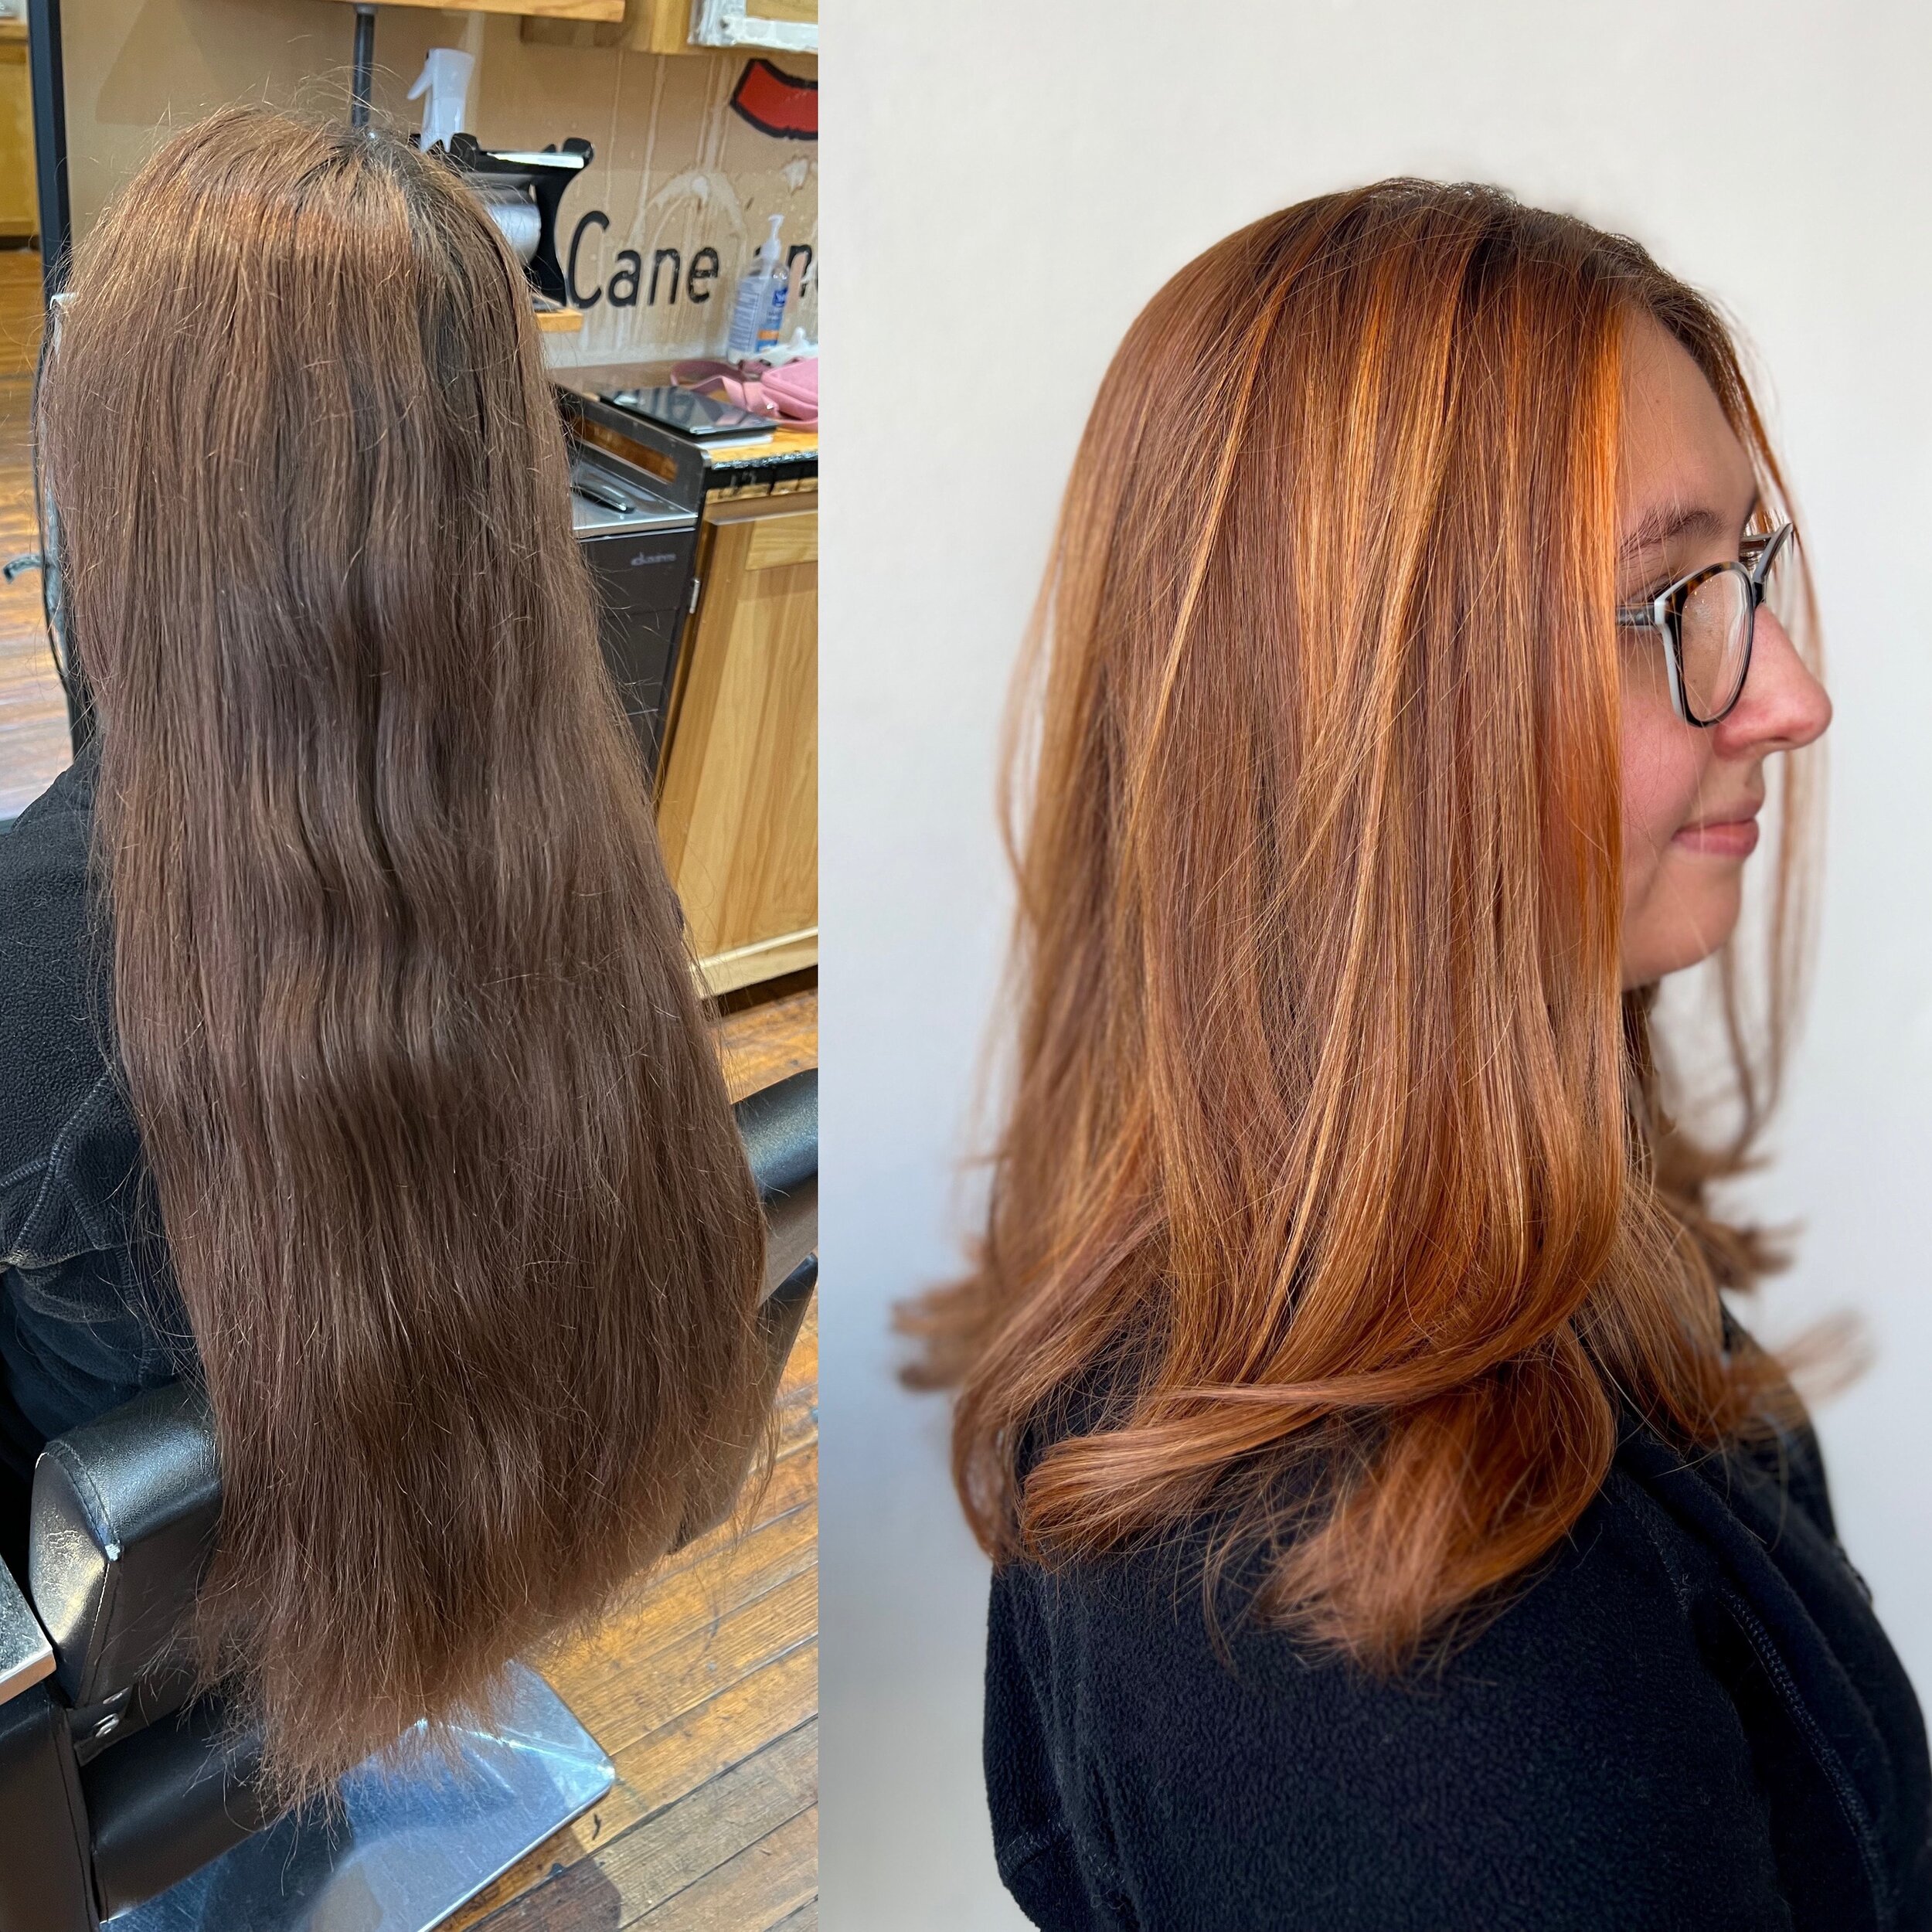 Oh, the difference a haircut and two blonding sessions can make. 
&bull;
&bull;
&bull;
&bull;
&bull;
&bull;
#copperbalayage #copperhair #balayage #dimensionalcolor #coolhair #614 #614columbus #614living #614hair #614hairstylist #614salon #cbus #cbusl